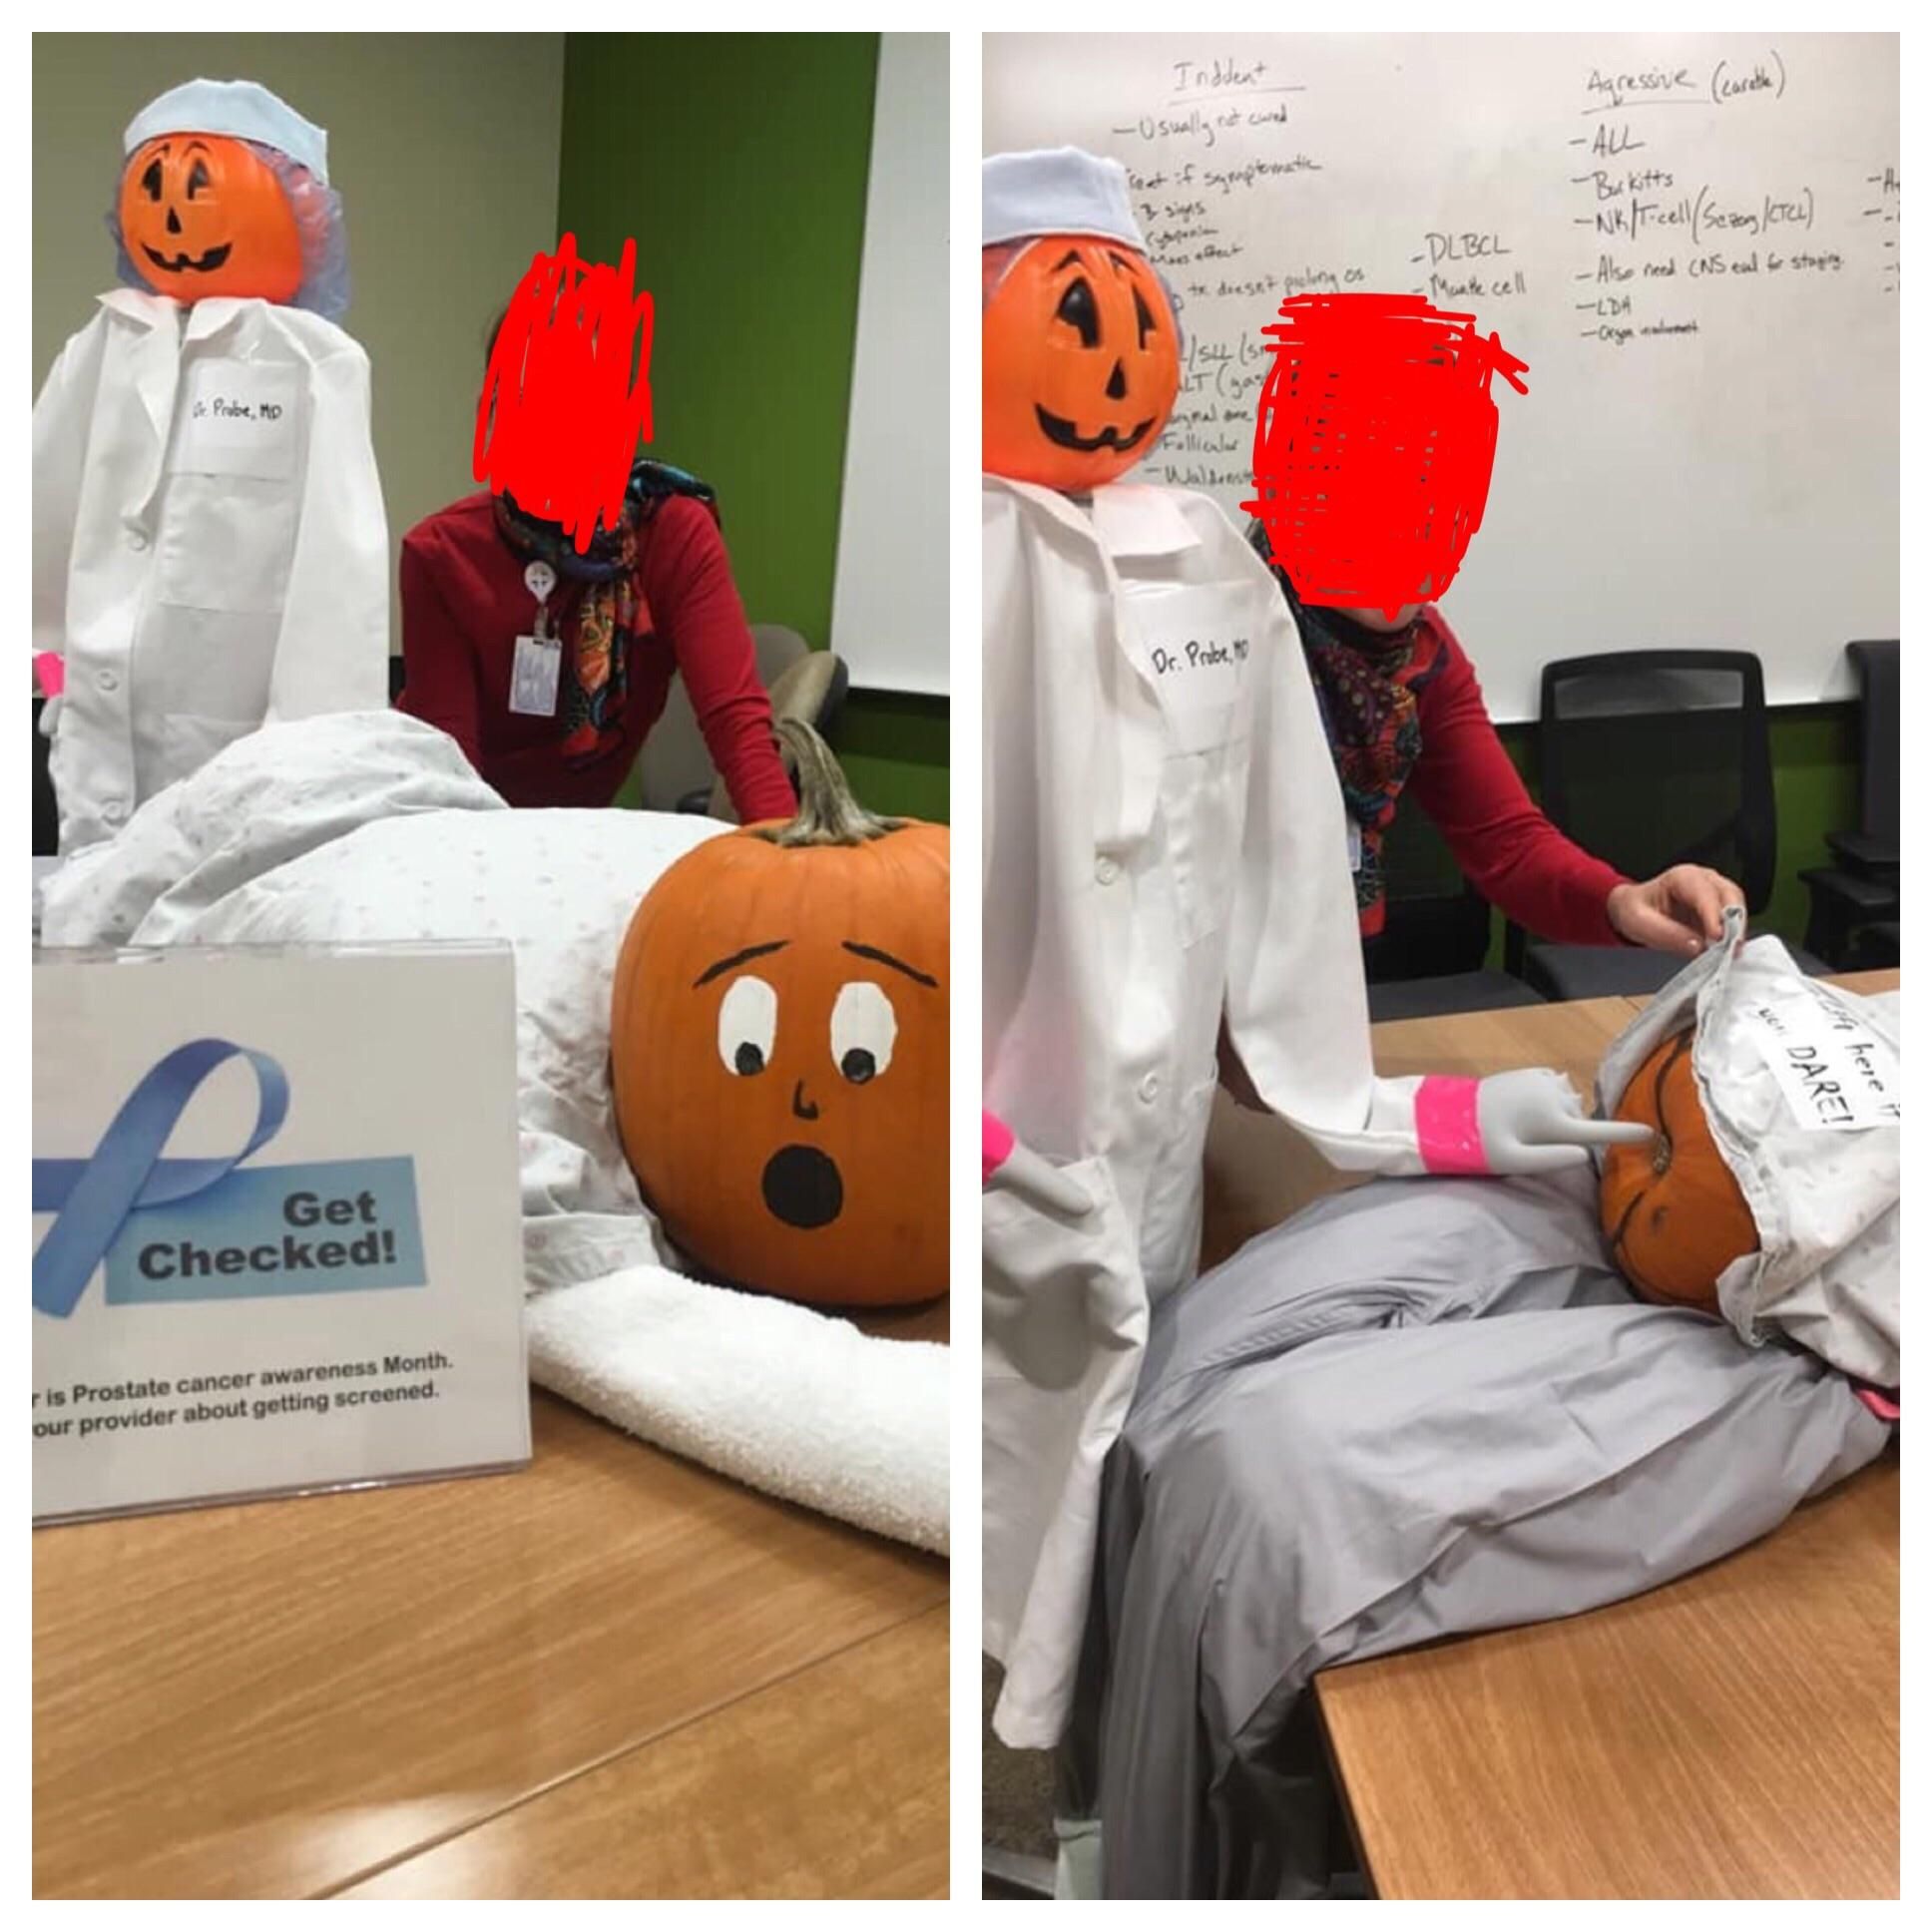 The cancer clinic my mom works for entered a Pumpkin Halloween contest yesterday, this is what they came up with